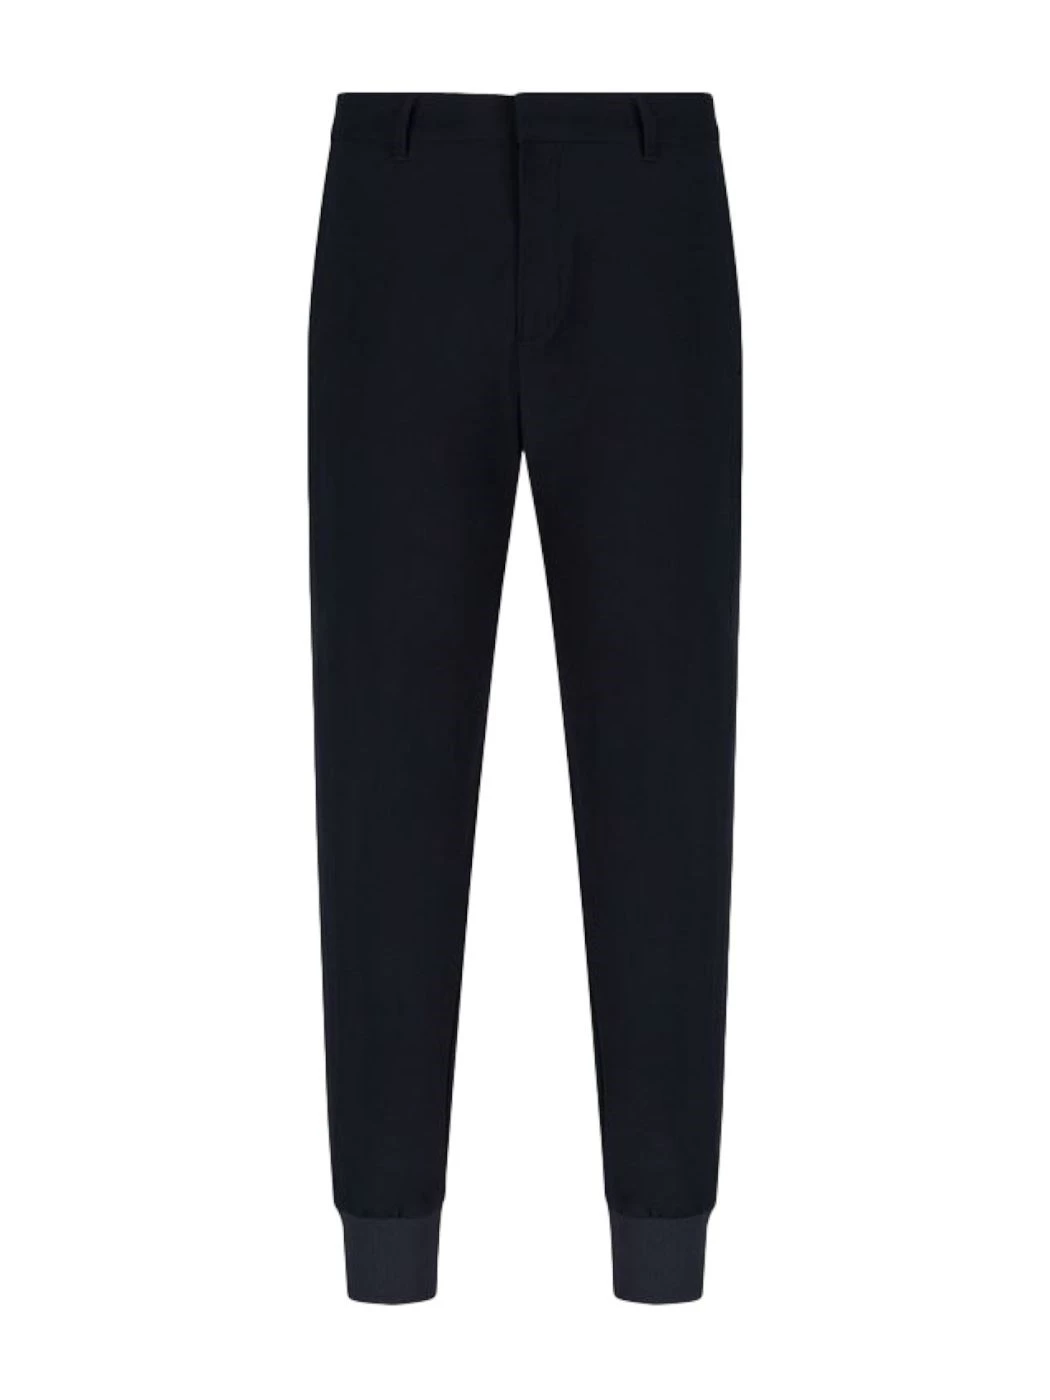 Armani Exchange casual trousers